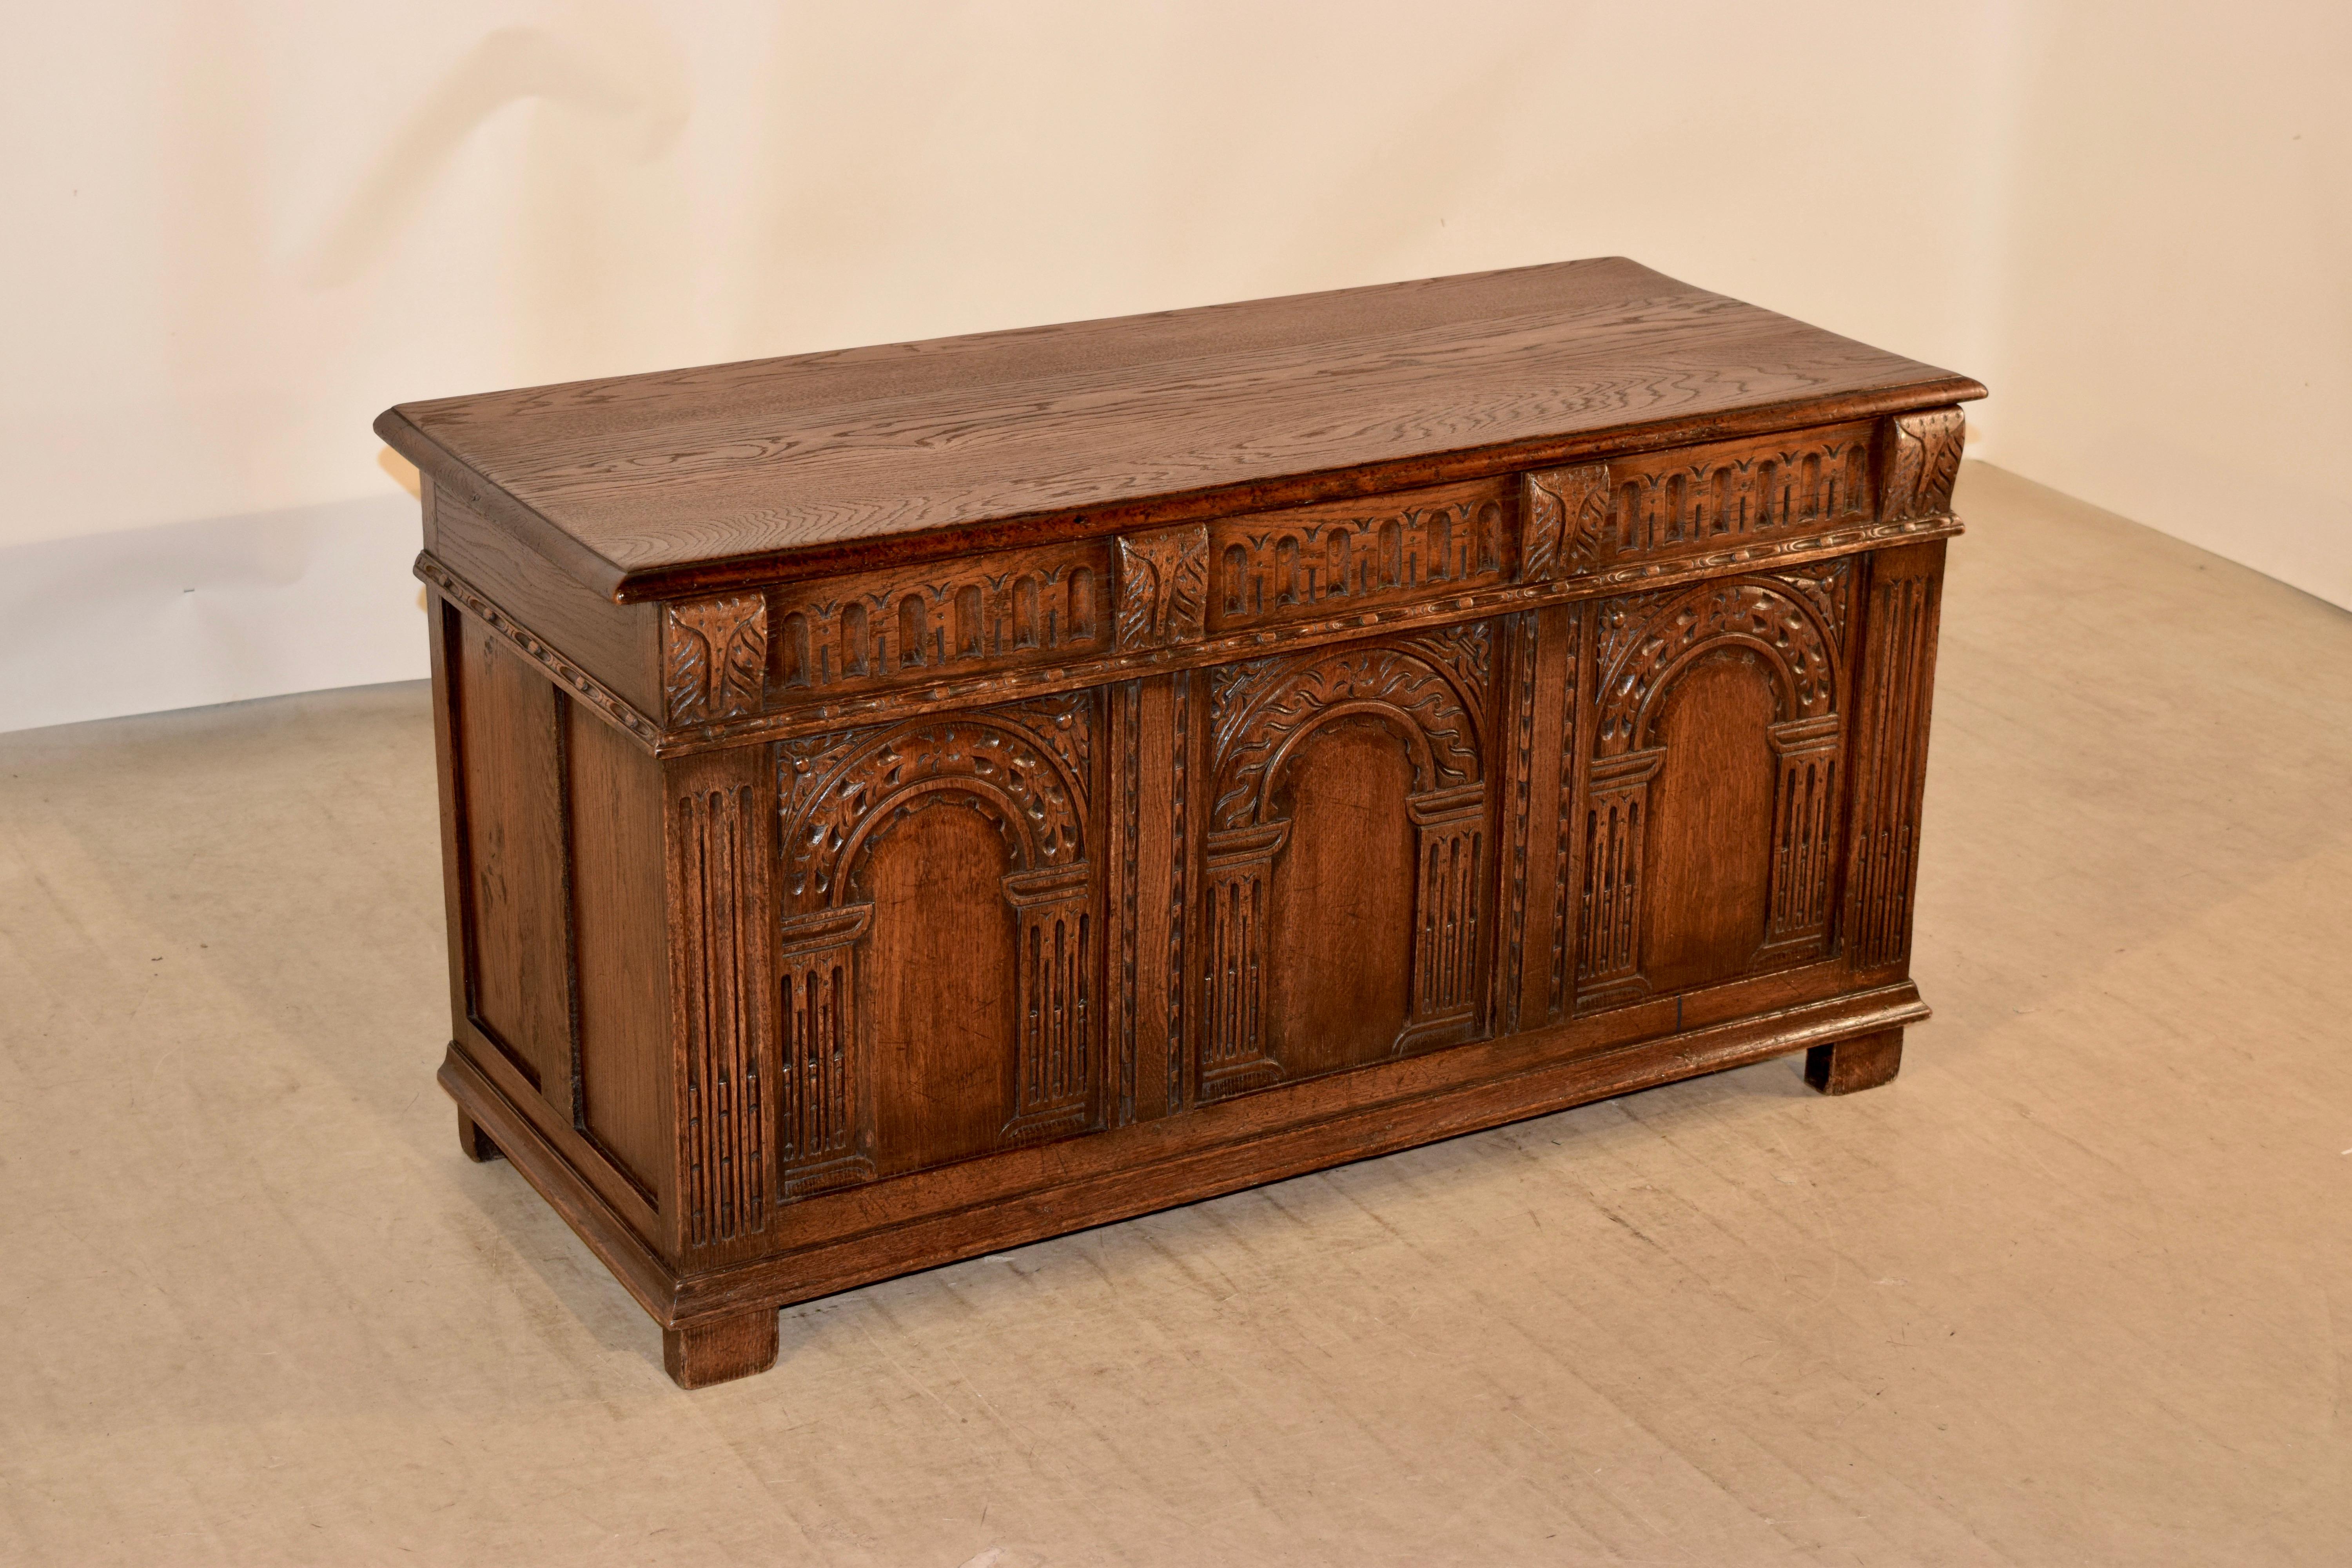 19th century oak blanket chest from England with a beveled edge around the top, which opens to reveal storage. The sides are paneled and have hand carved decorated molding. The front is paneled as well and has hand carved decorative carvings over